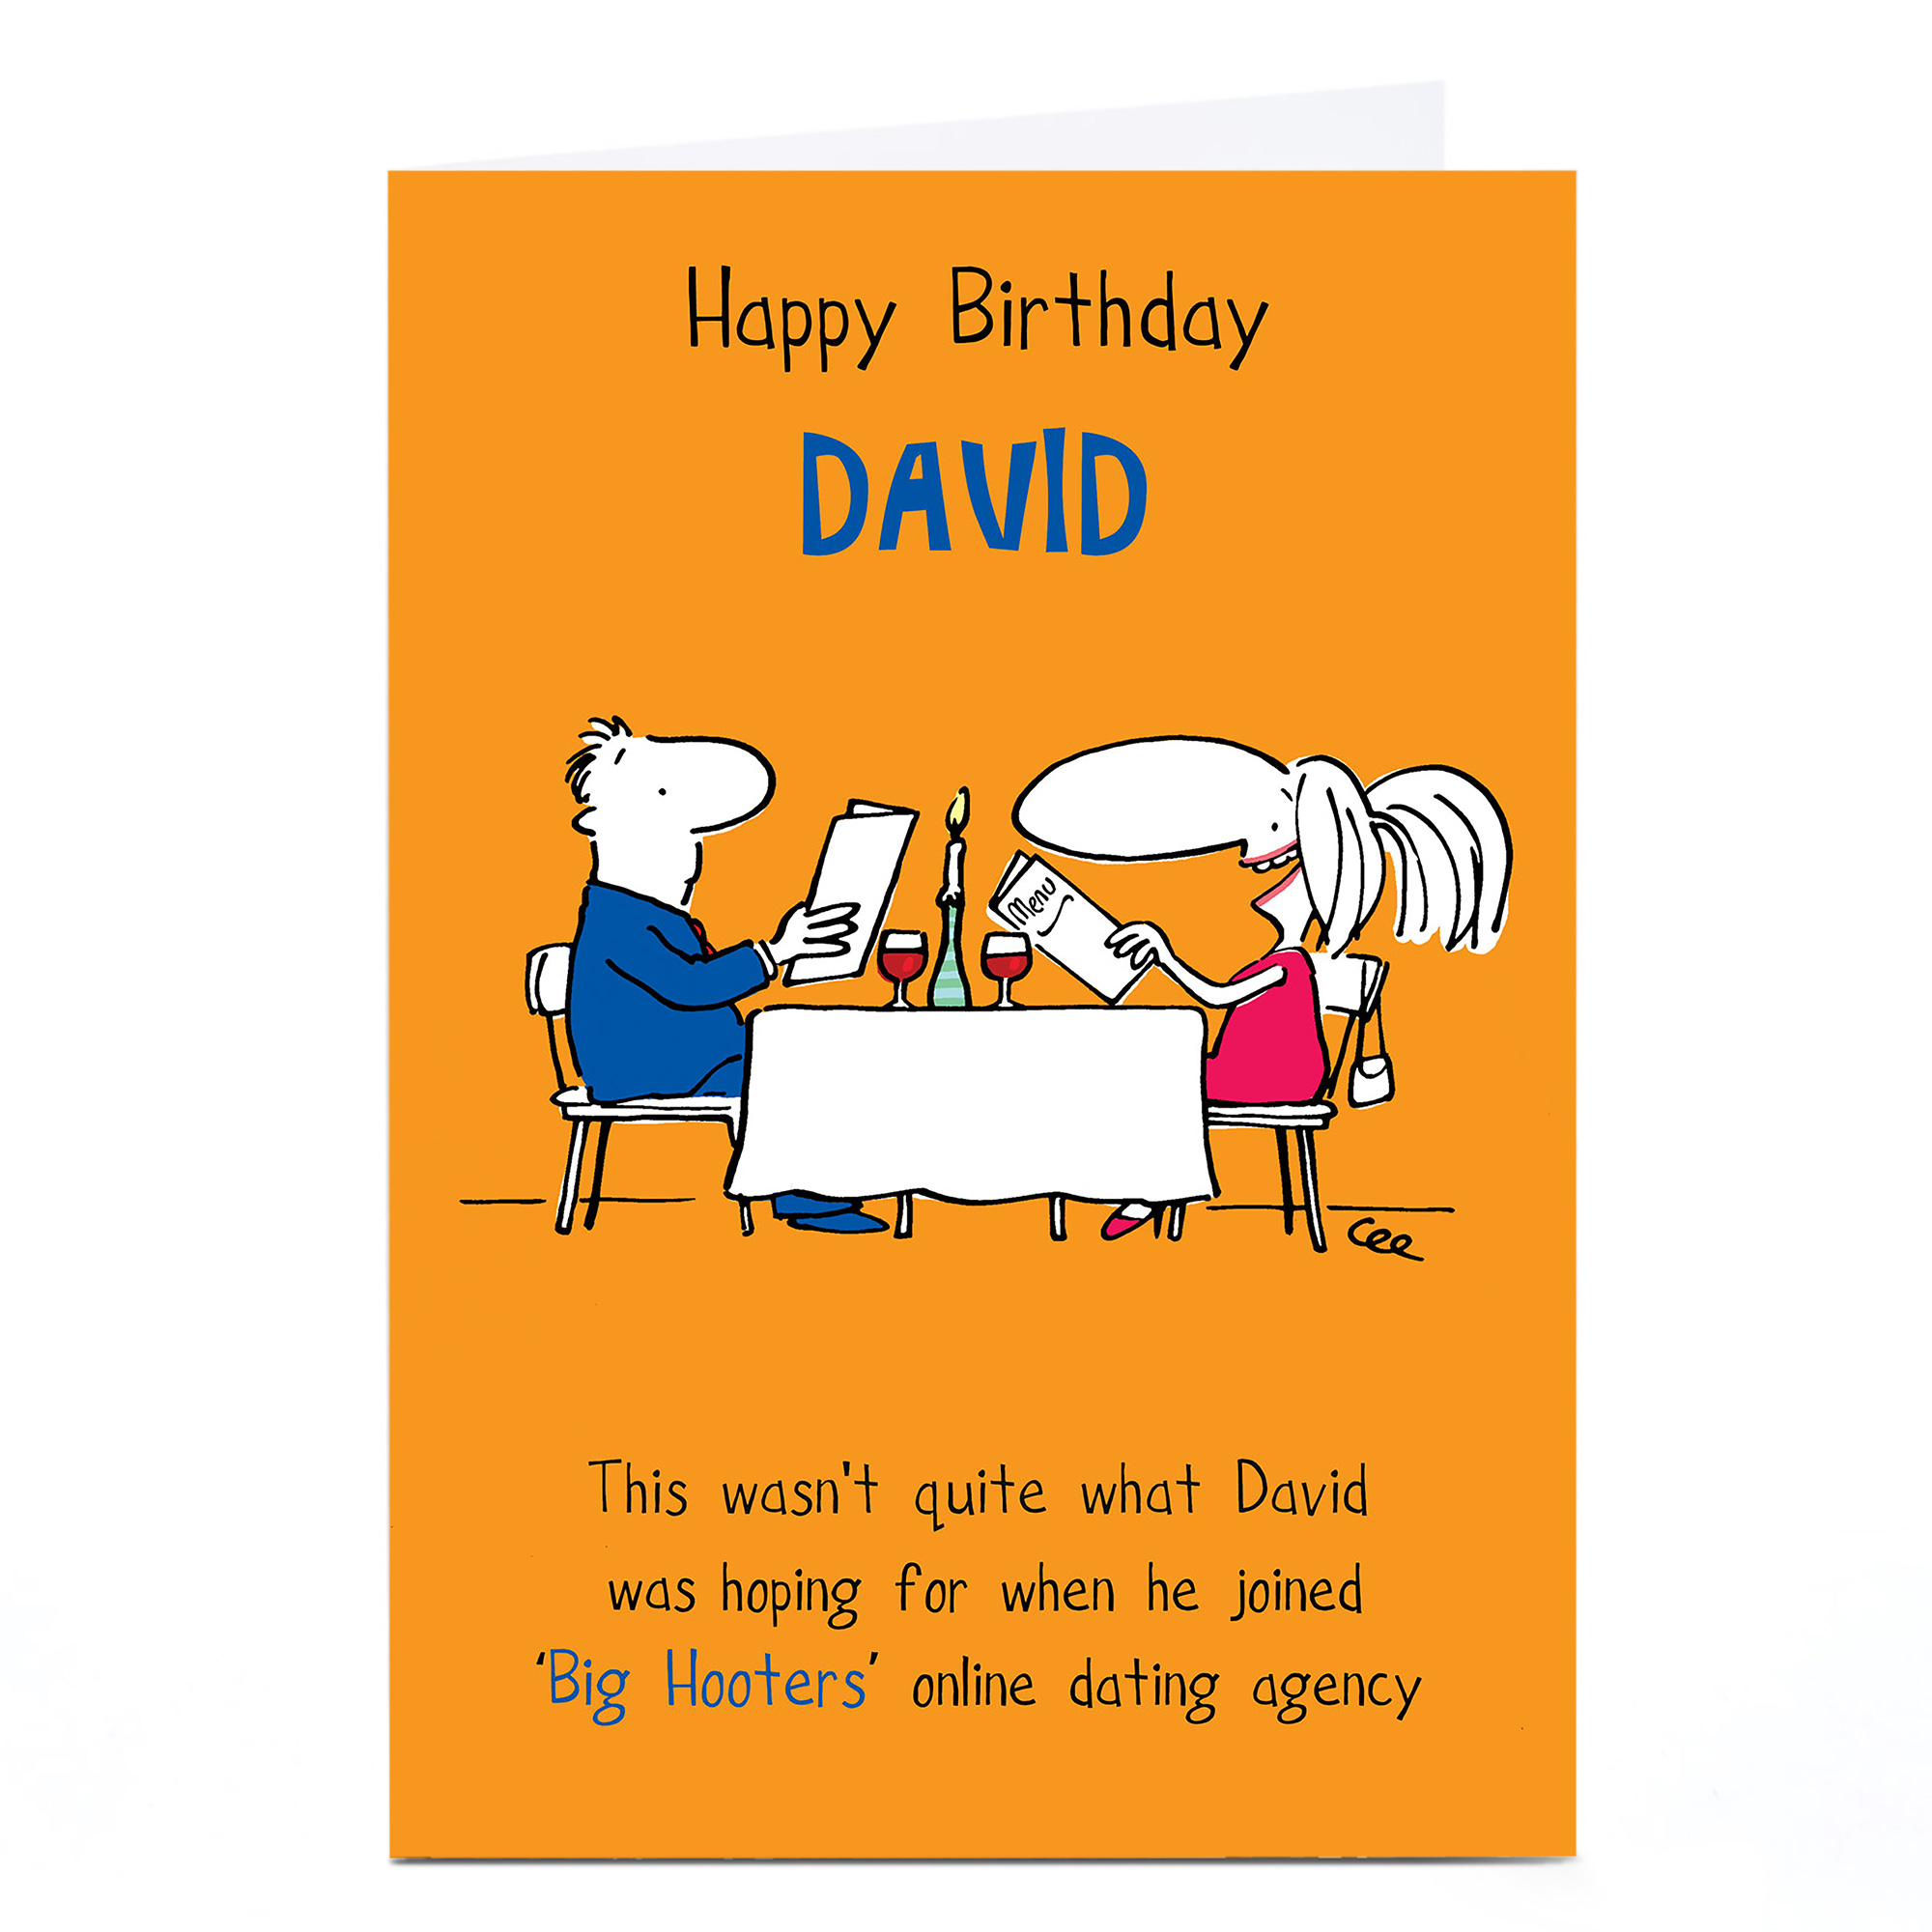 Buy Personalised Birthday Card - Online Dating Agency for GBP 1.79